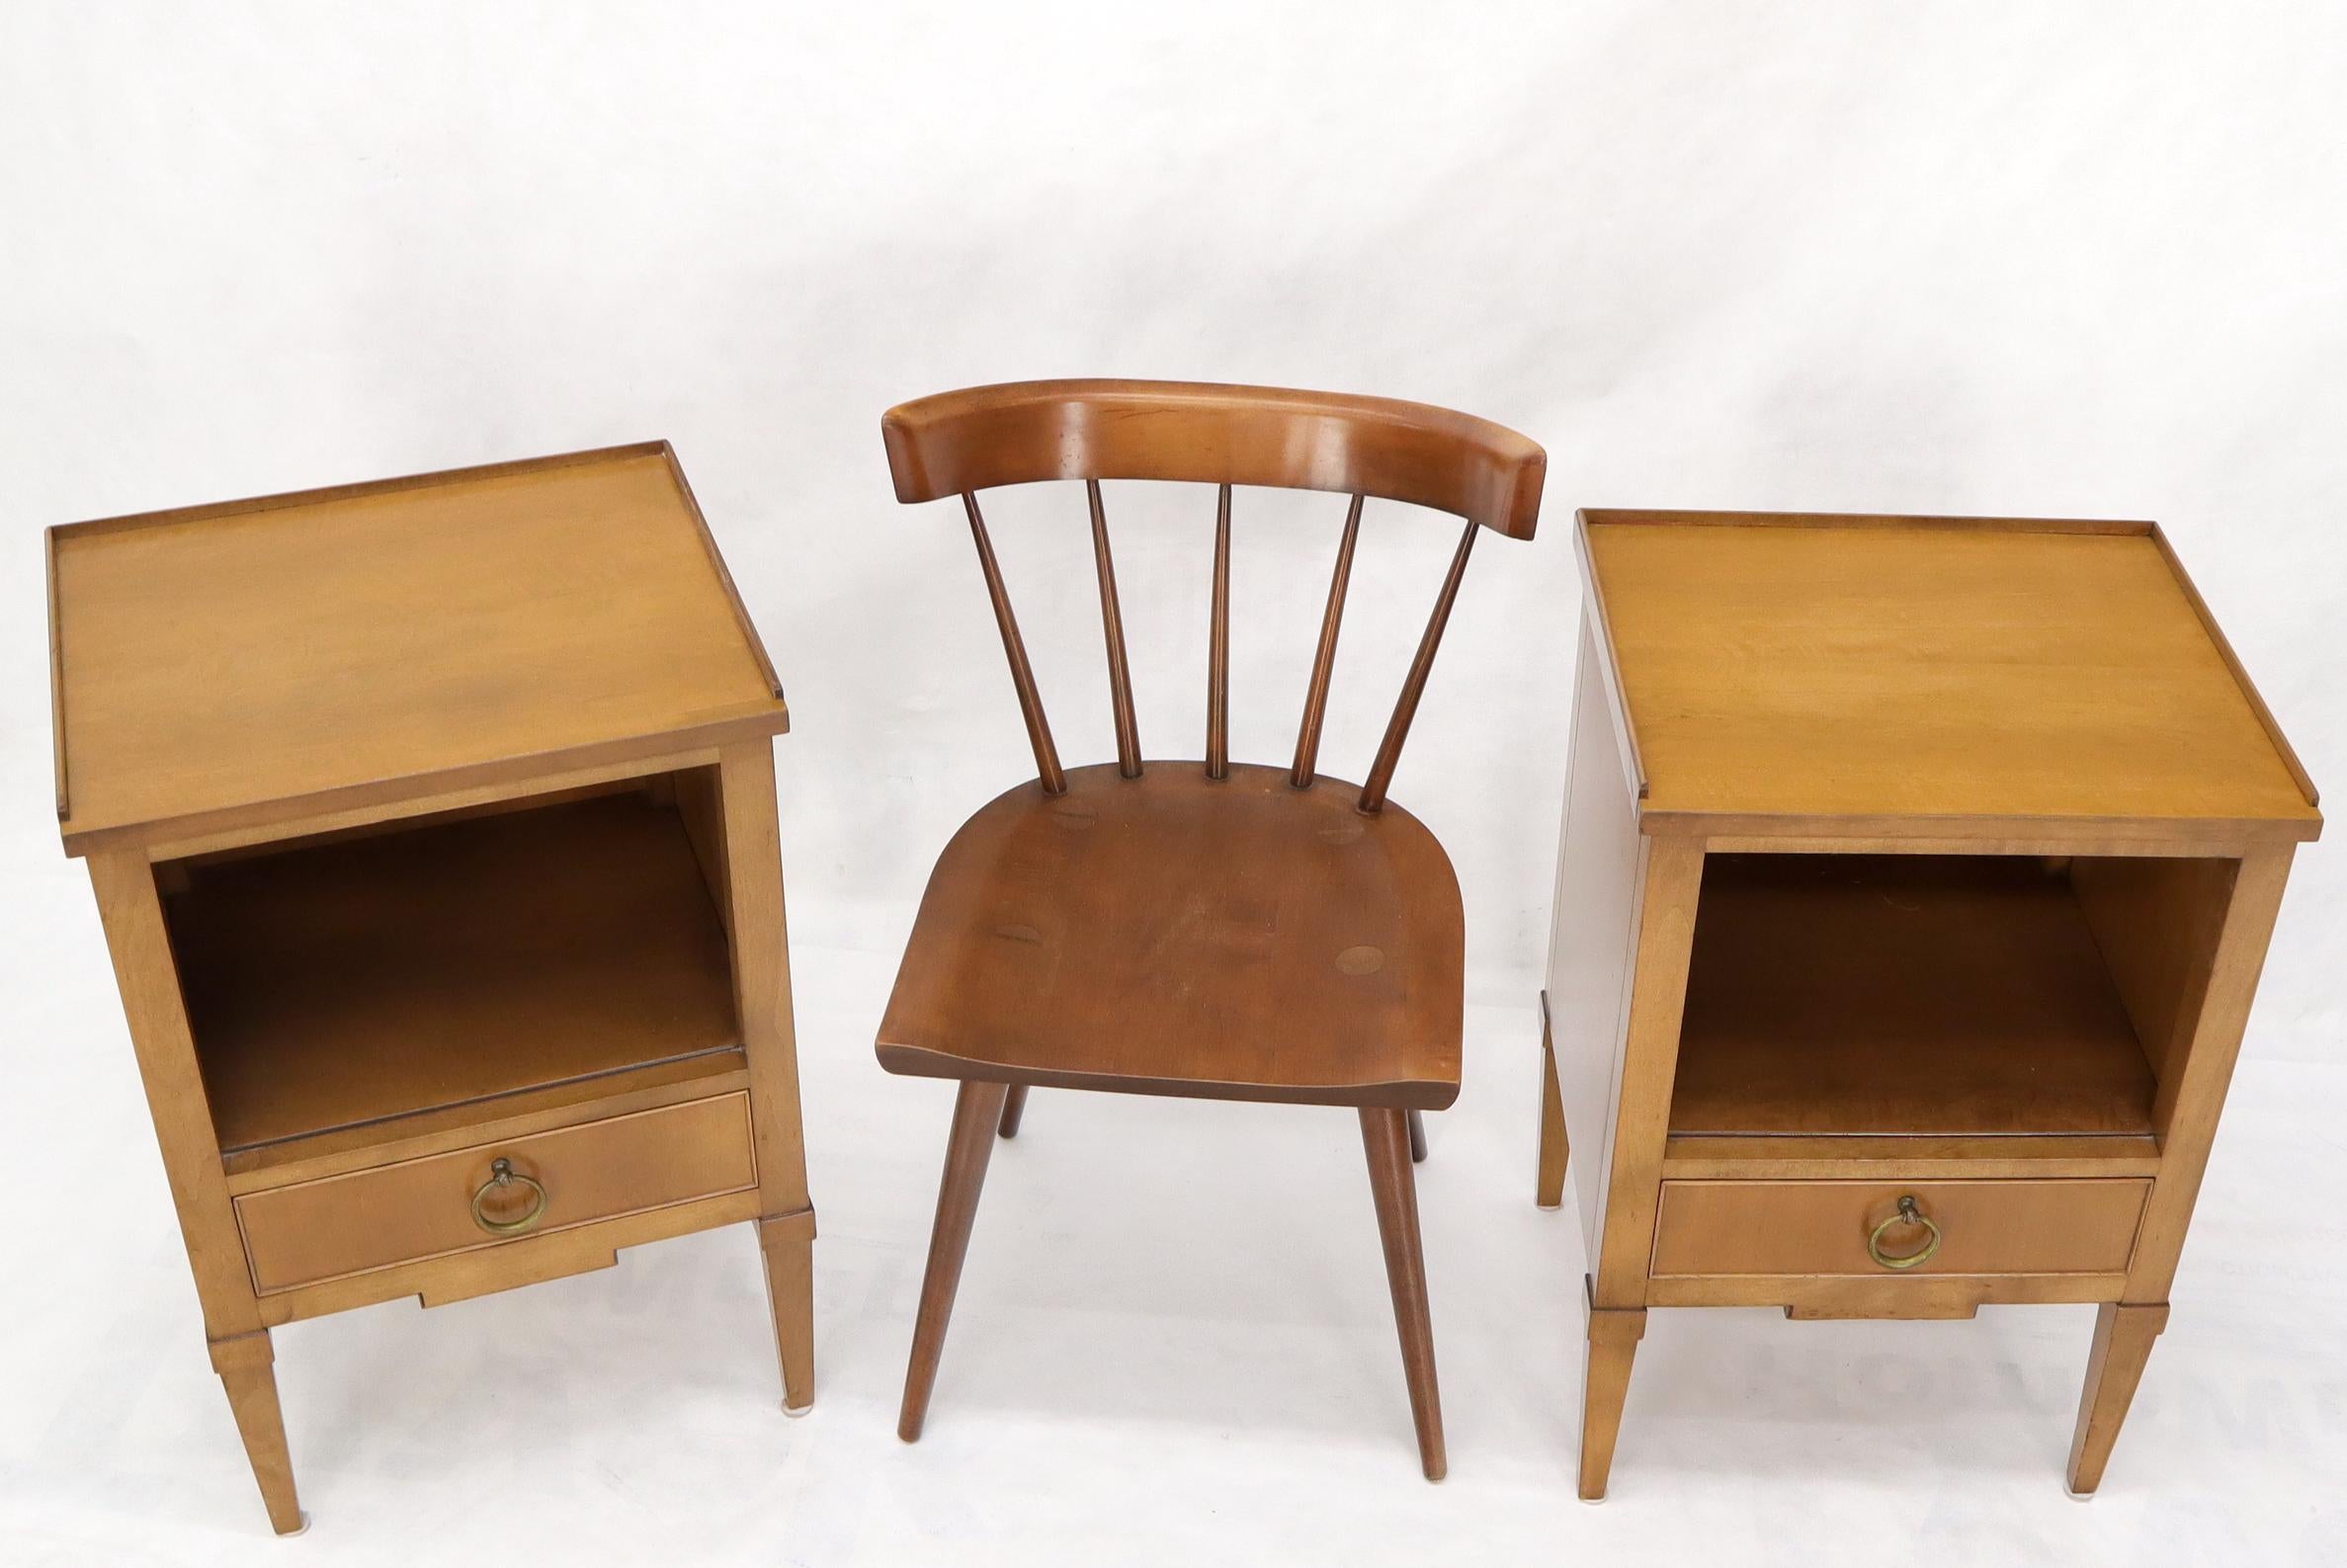 Regency - Mid-Century Modern influence pair of nightstands by Kittinger. Gallery top one drawer with a decorative brass ring pull.